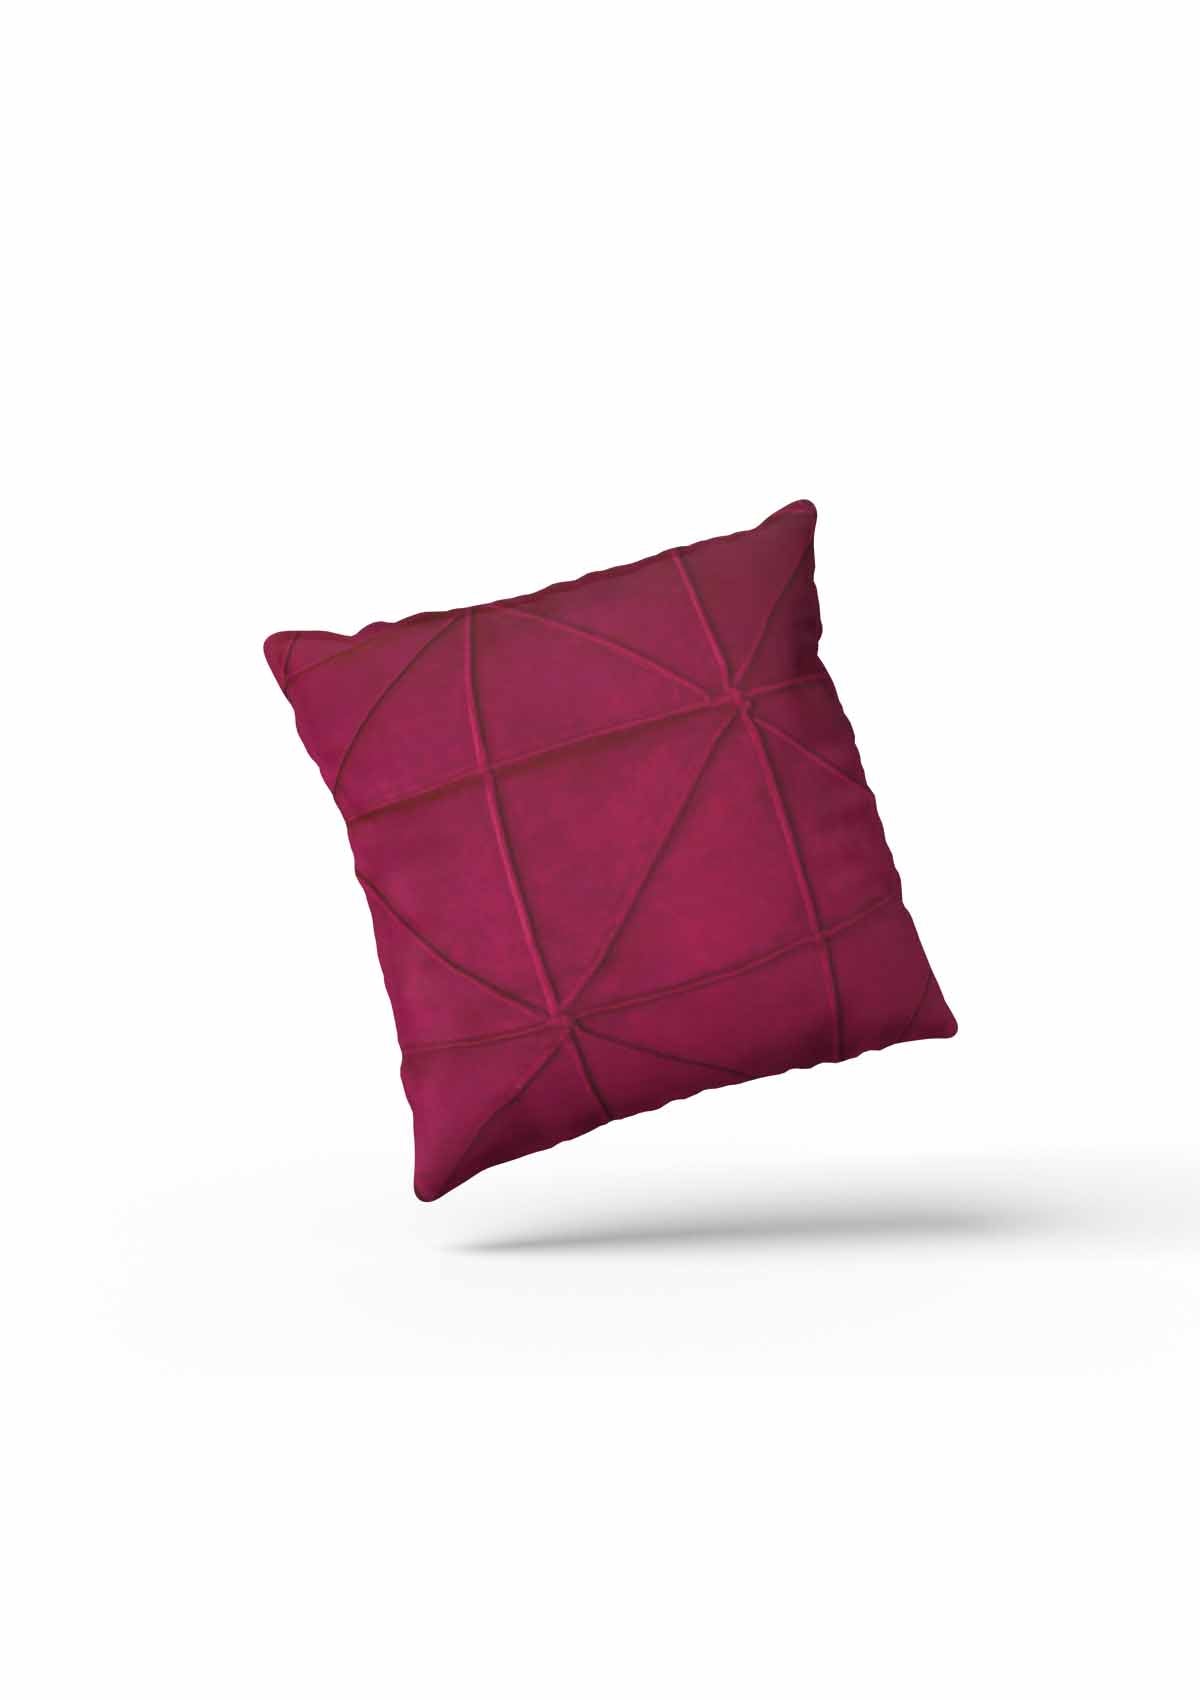 Patterned Velvet Cushion Covers | CovermyCushion